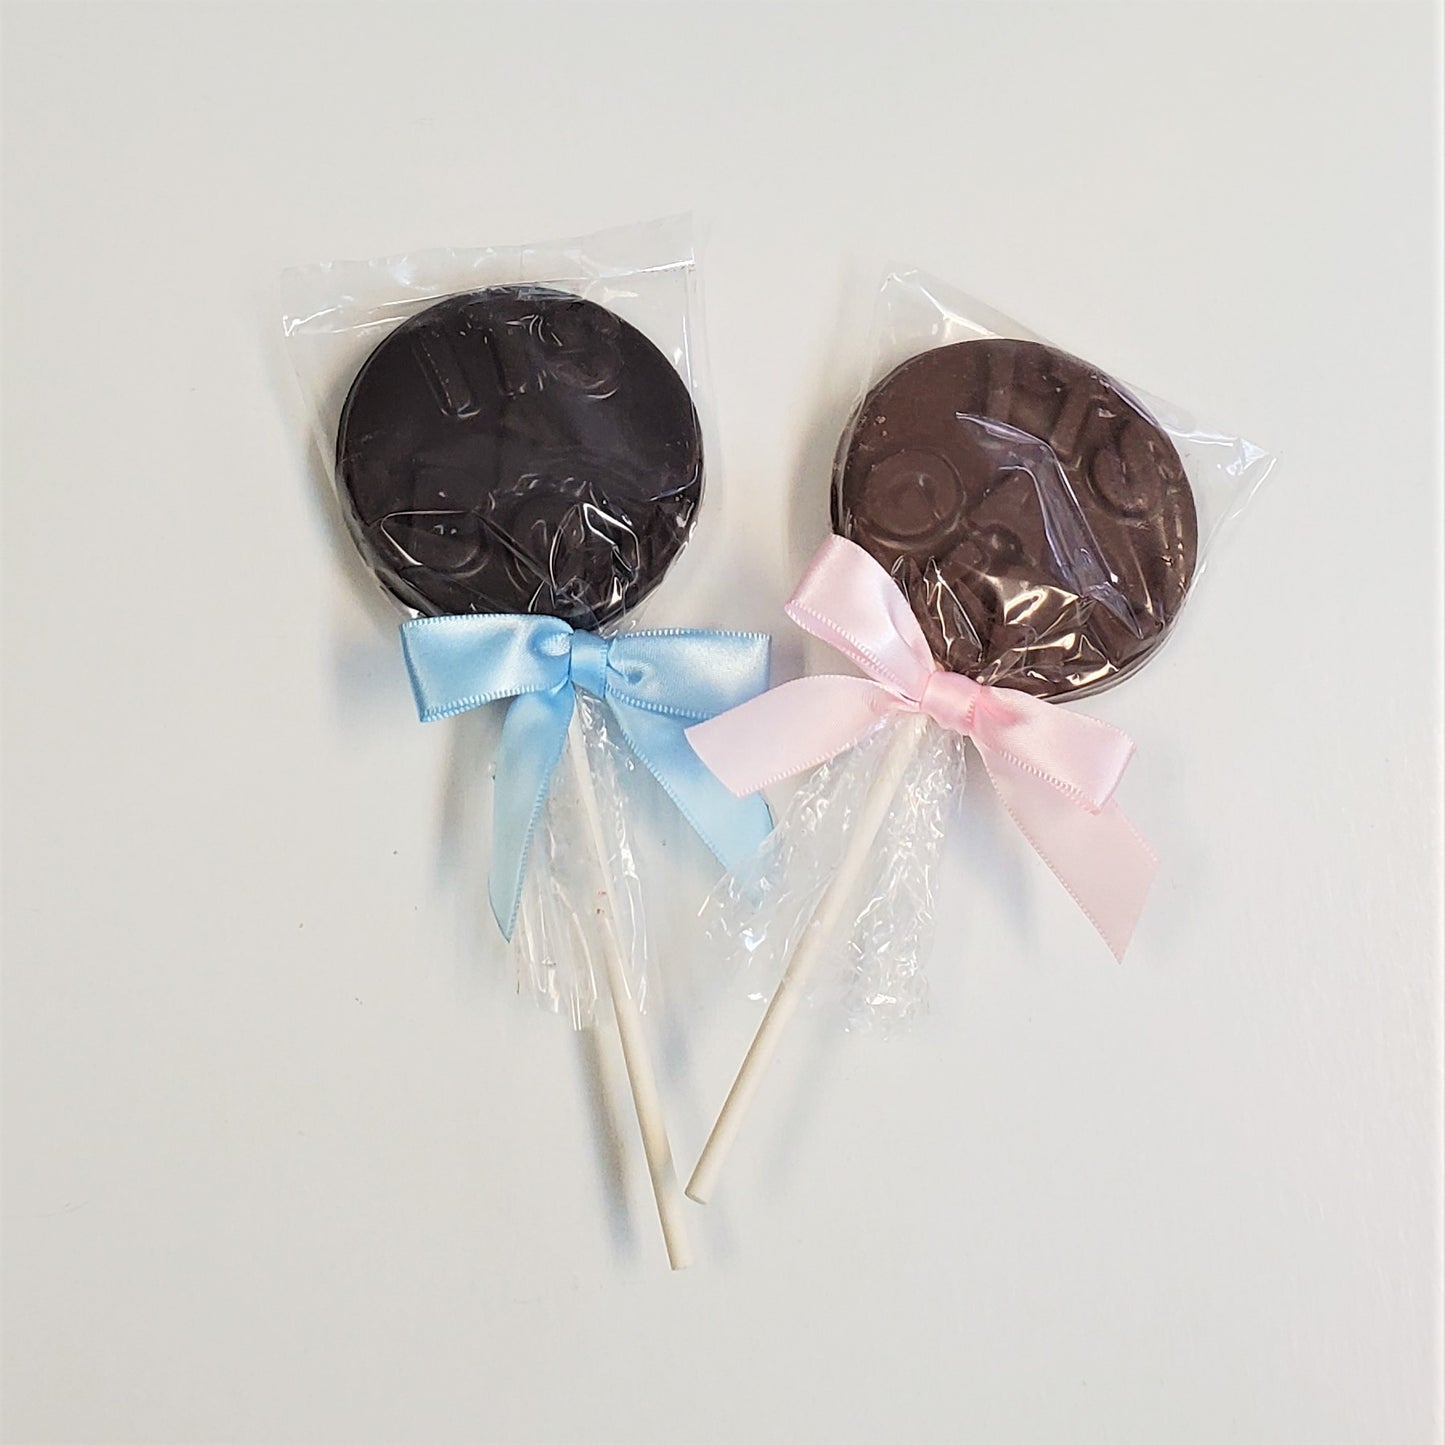 Milk and Dark Chocolate It's A Girl / It's a Boy Chocolate Medallions on a popsicle stick